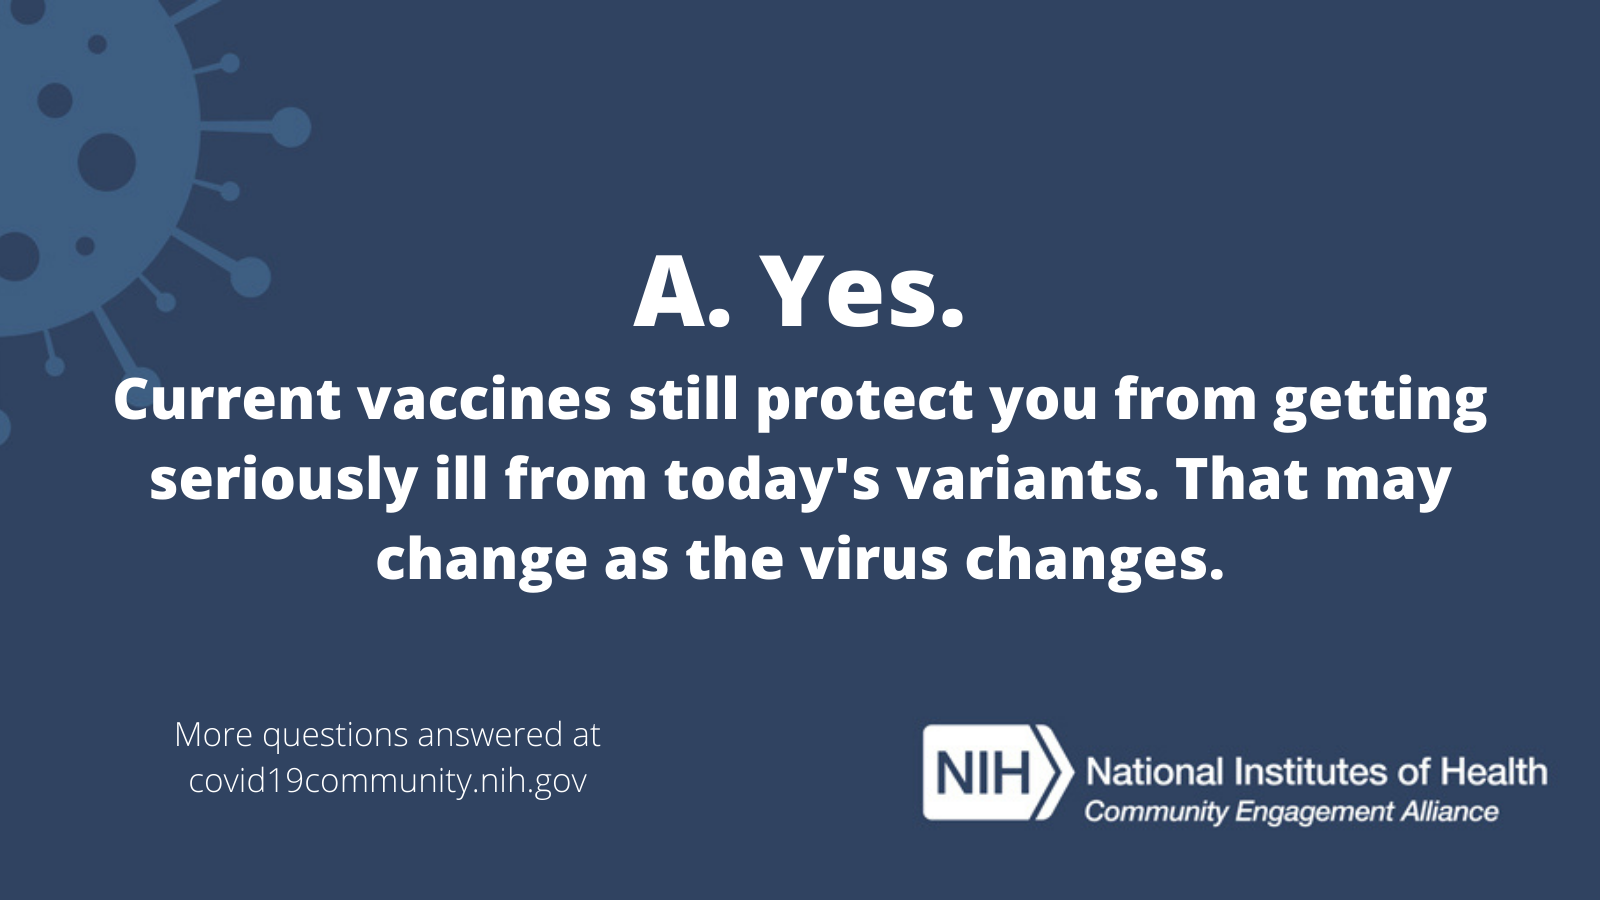 A. Yes. Current vaccines still protect you from getting seriously ill from today's variants. That may change as the virus changes. More vaccine questions answered at covid19community.nih.gov